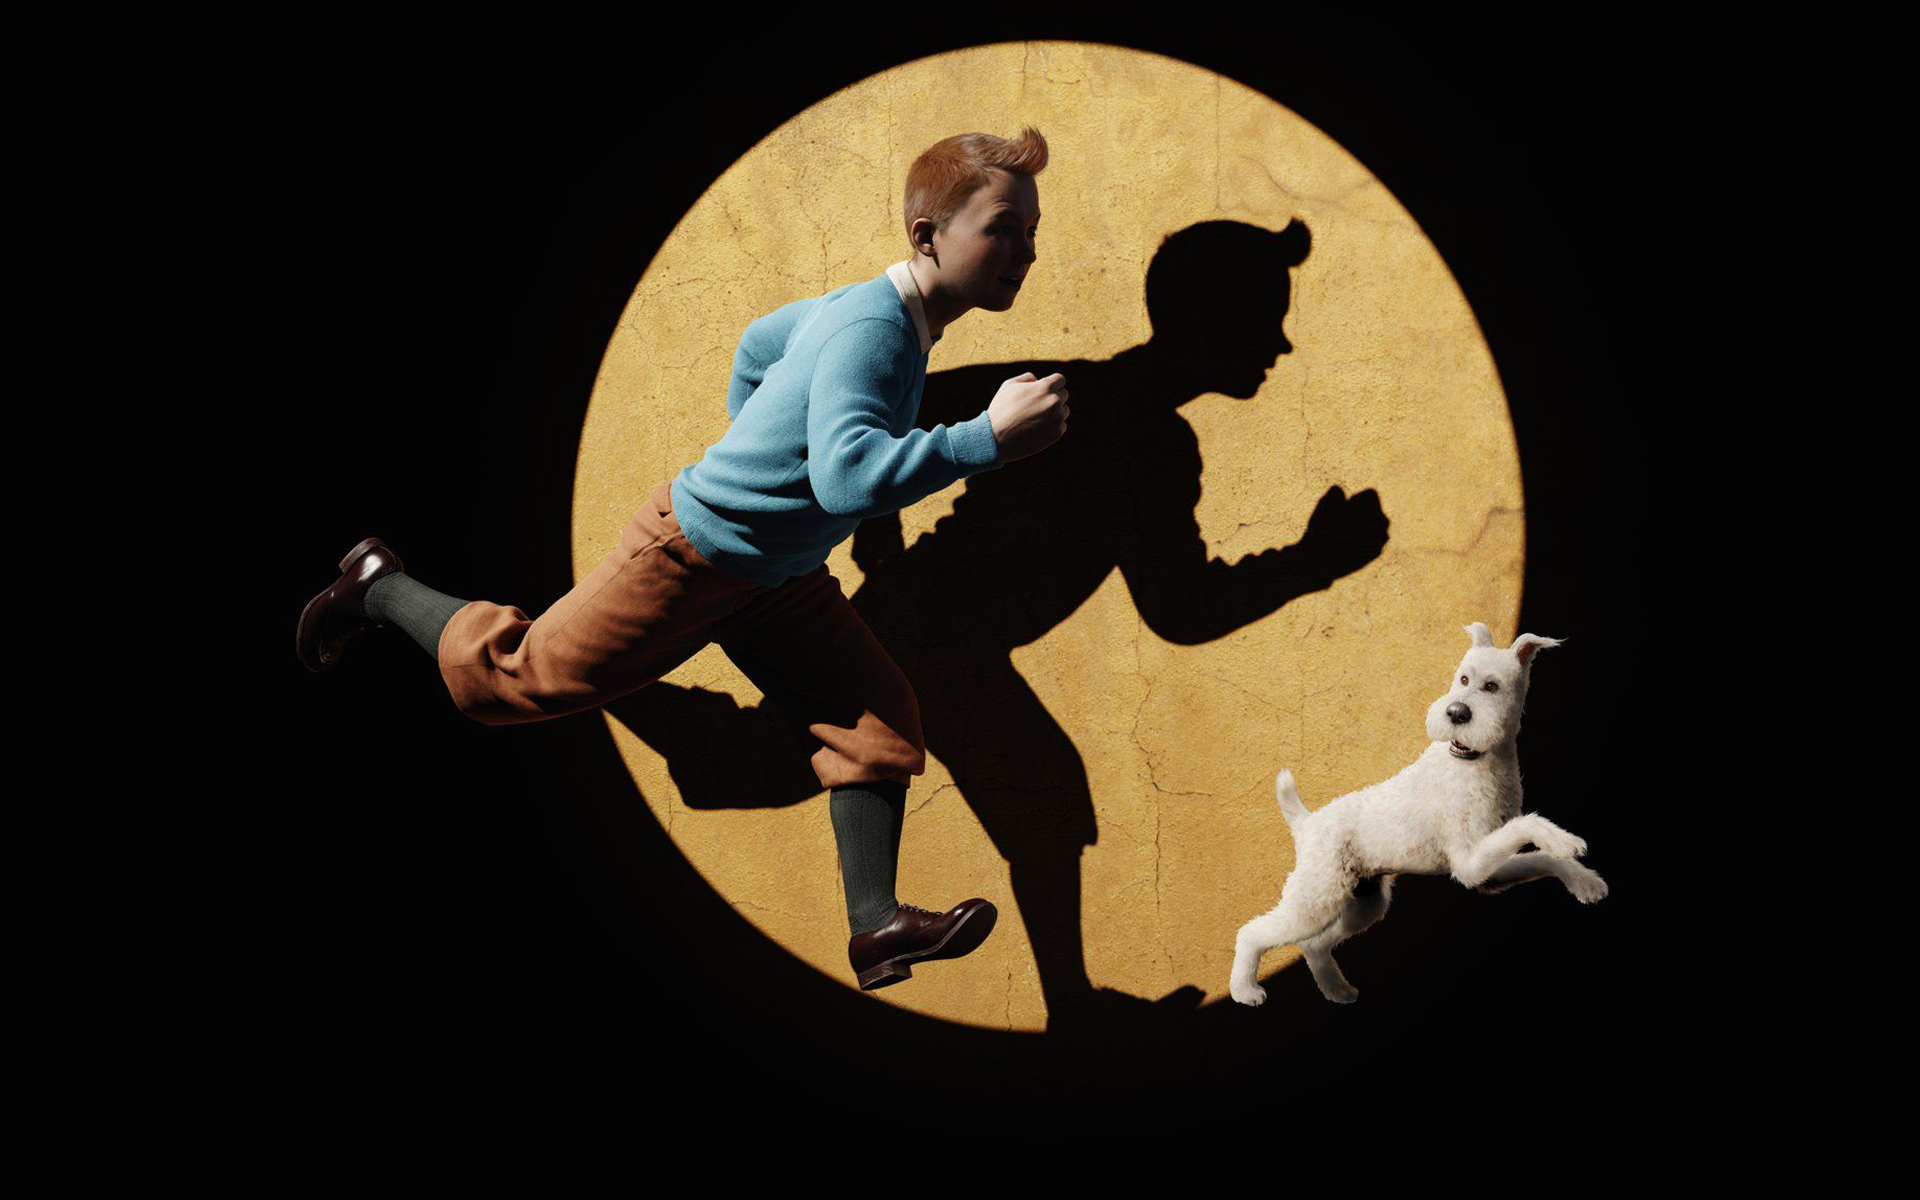 Tintin and Snowy in The Adventures of Tintin Wallpapers HD